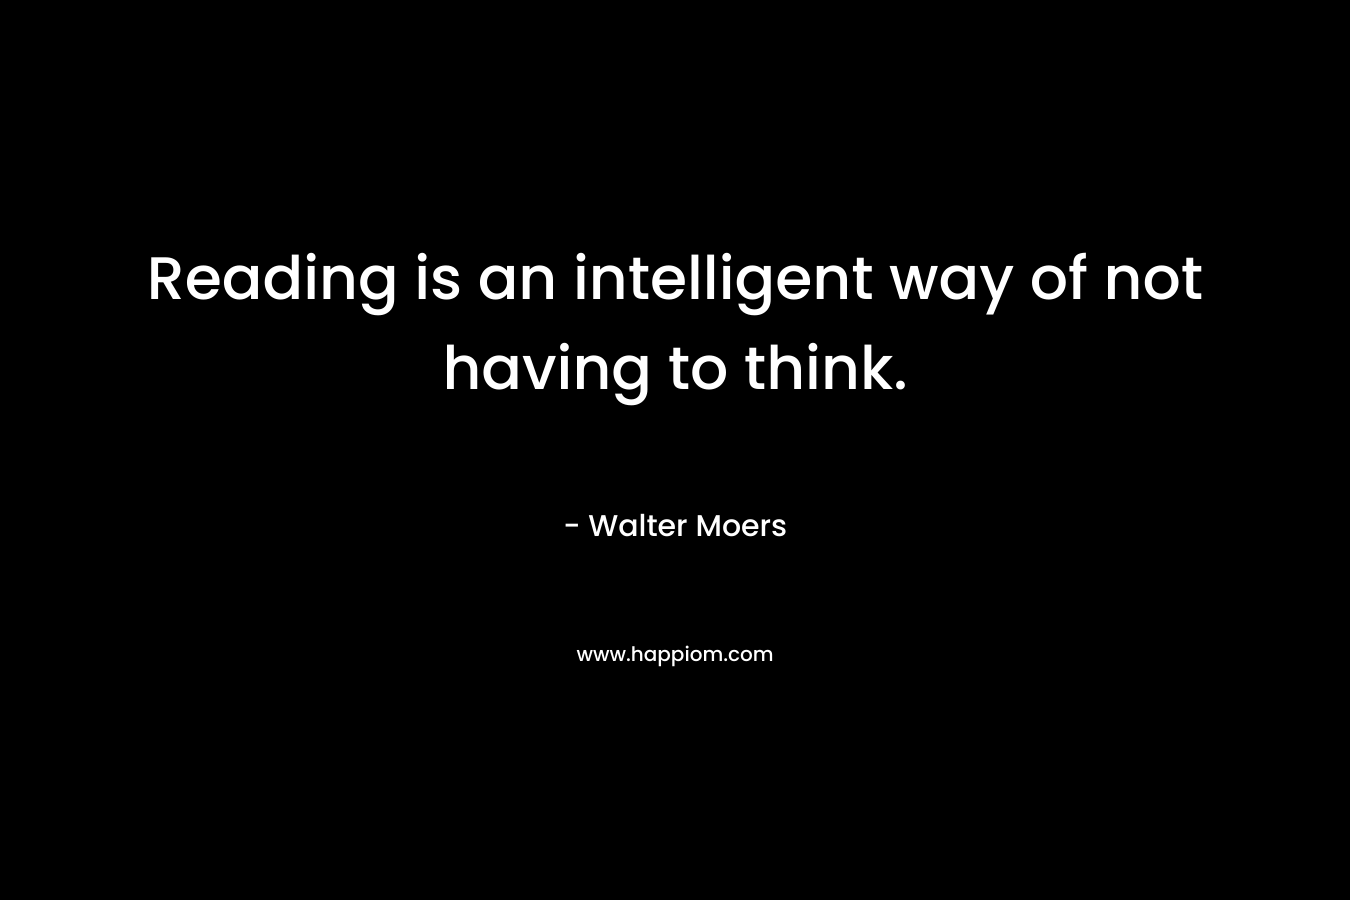 Reading is an intelligent way of not having to think.